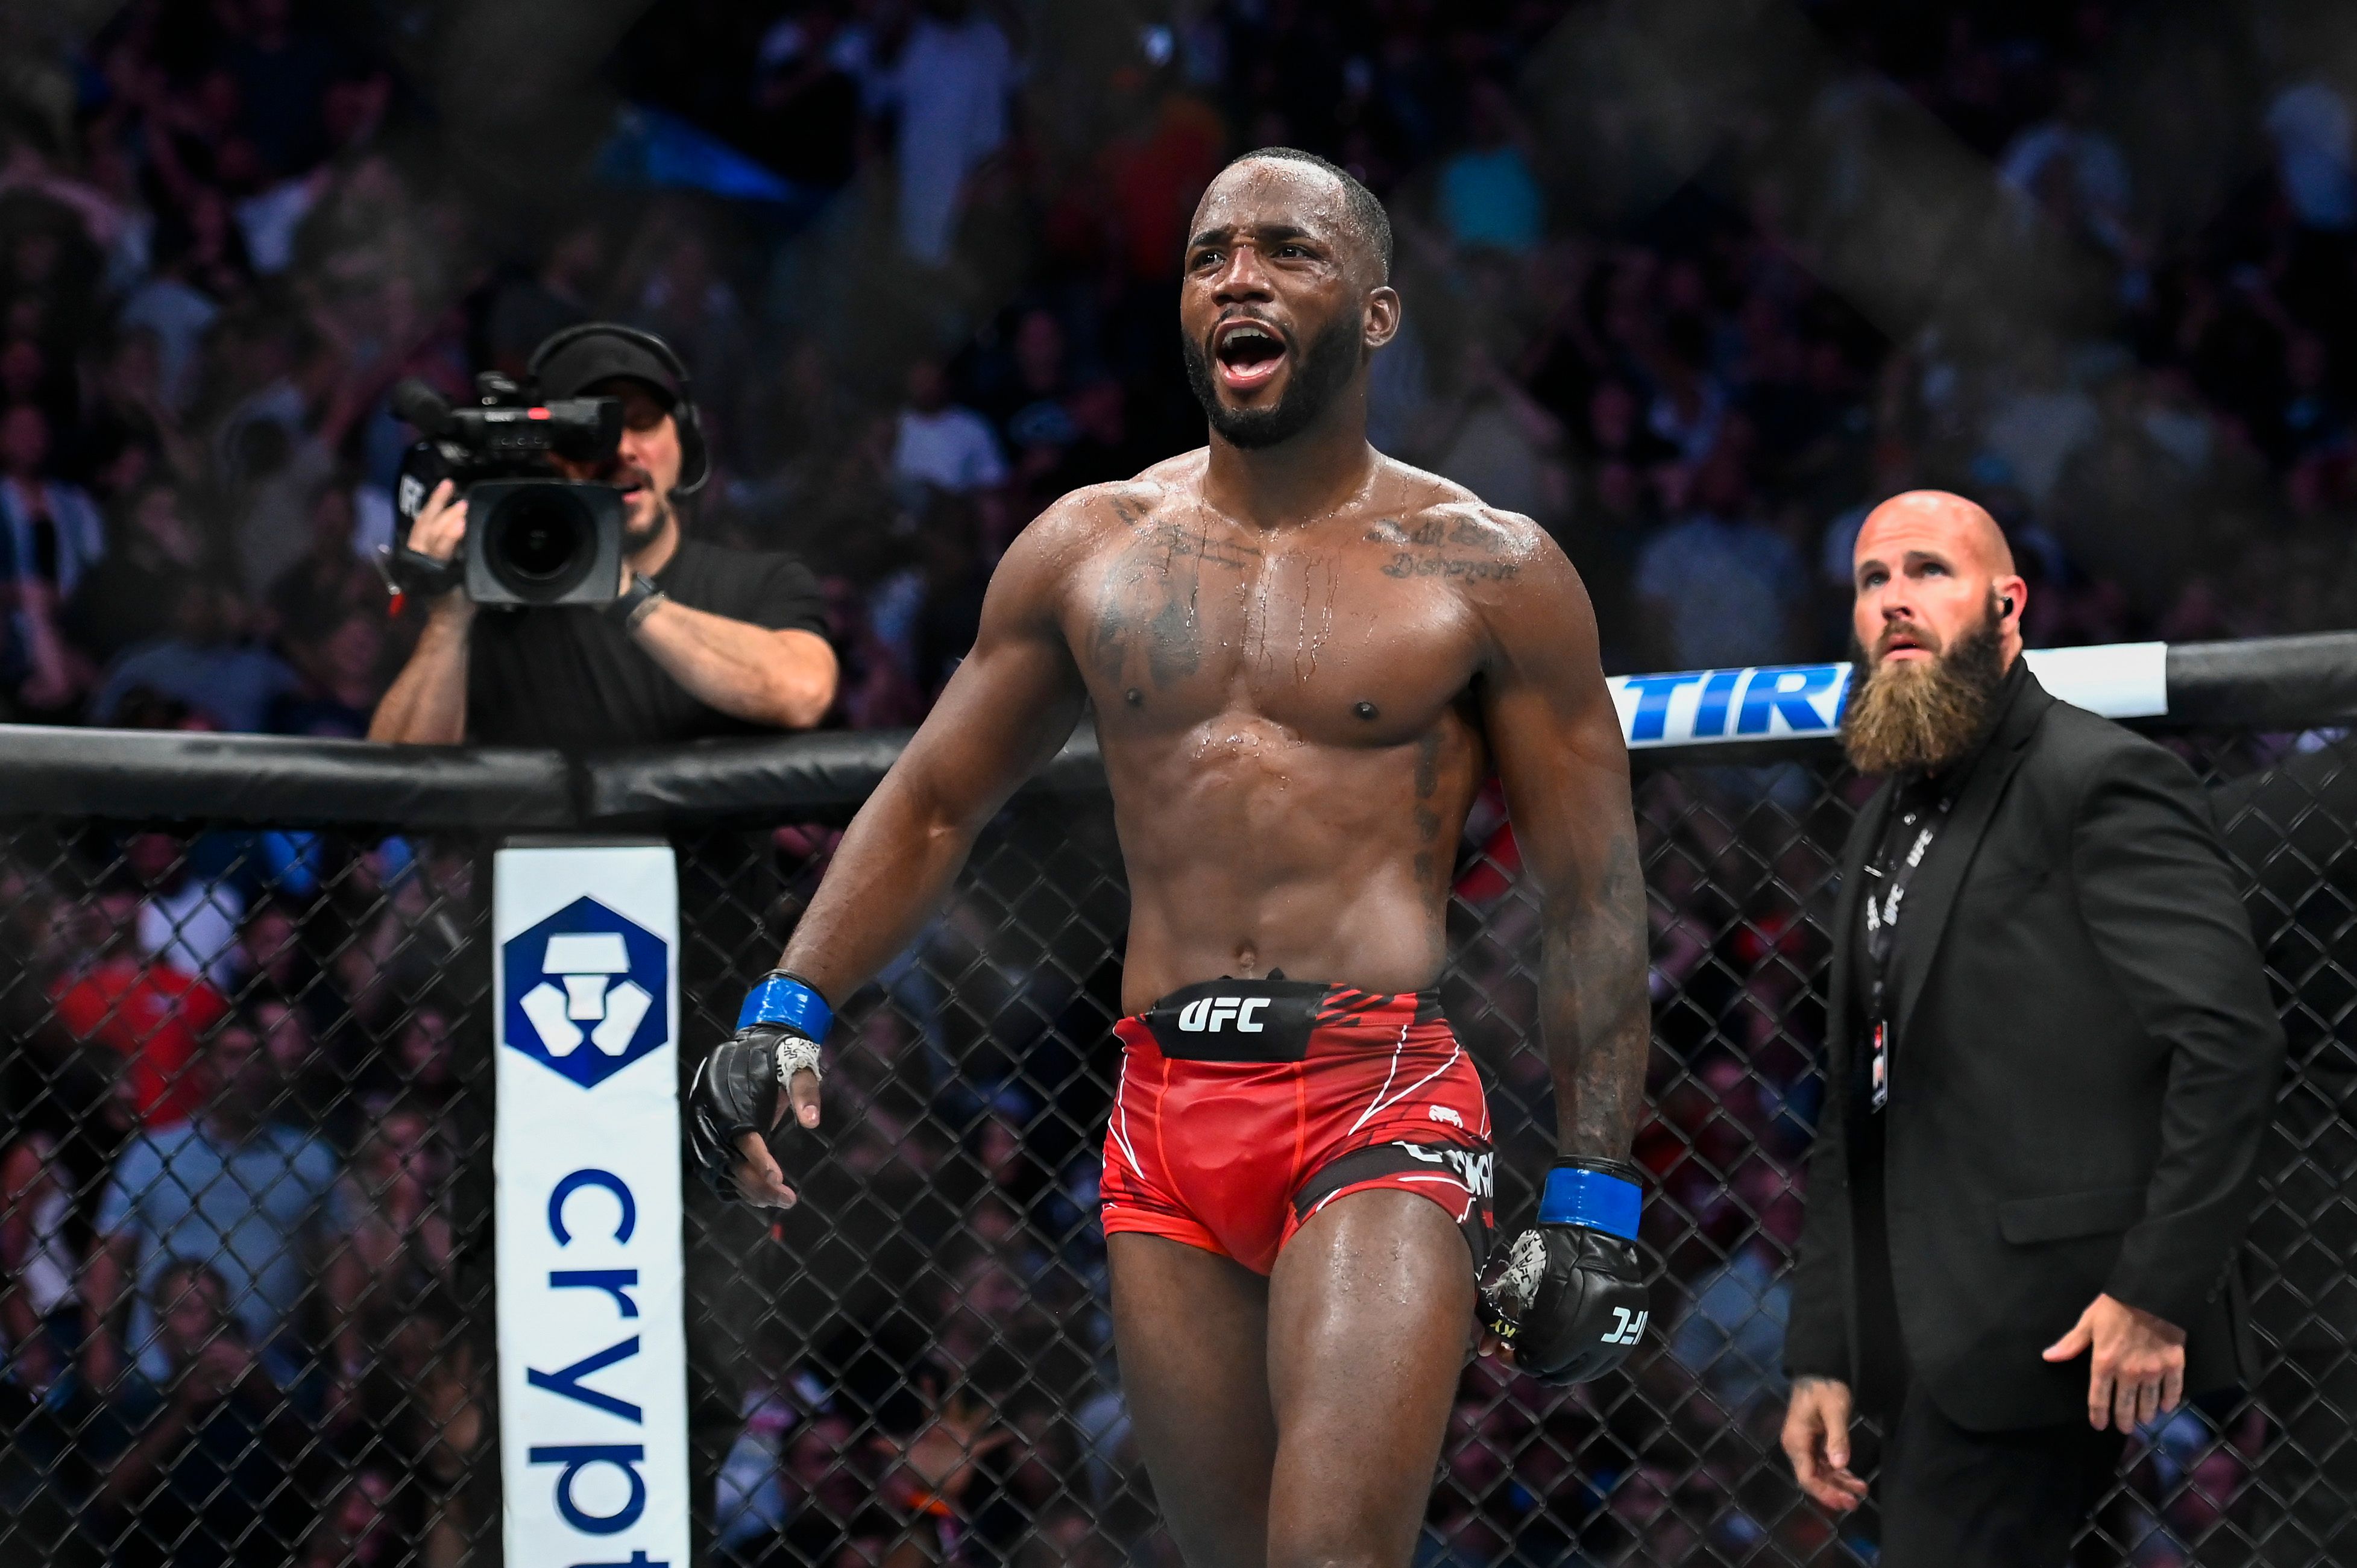 Leon Edwards is the UFC welterweight champion